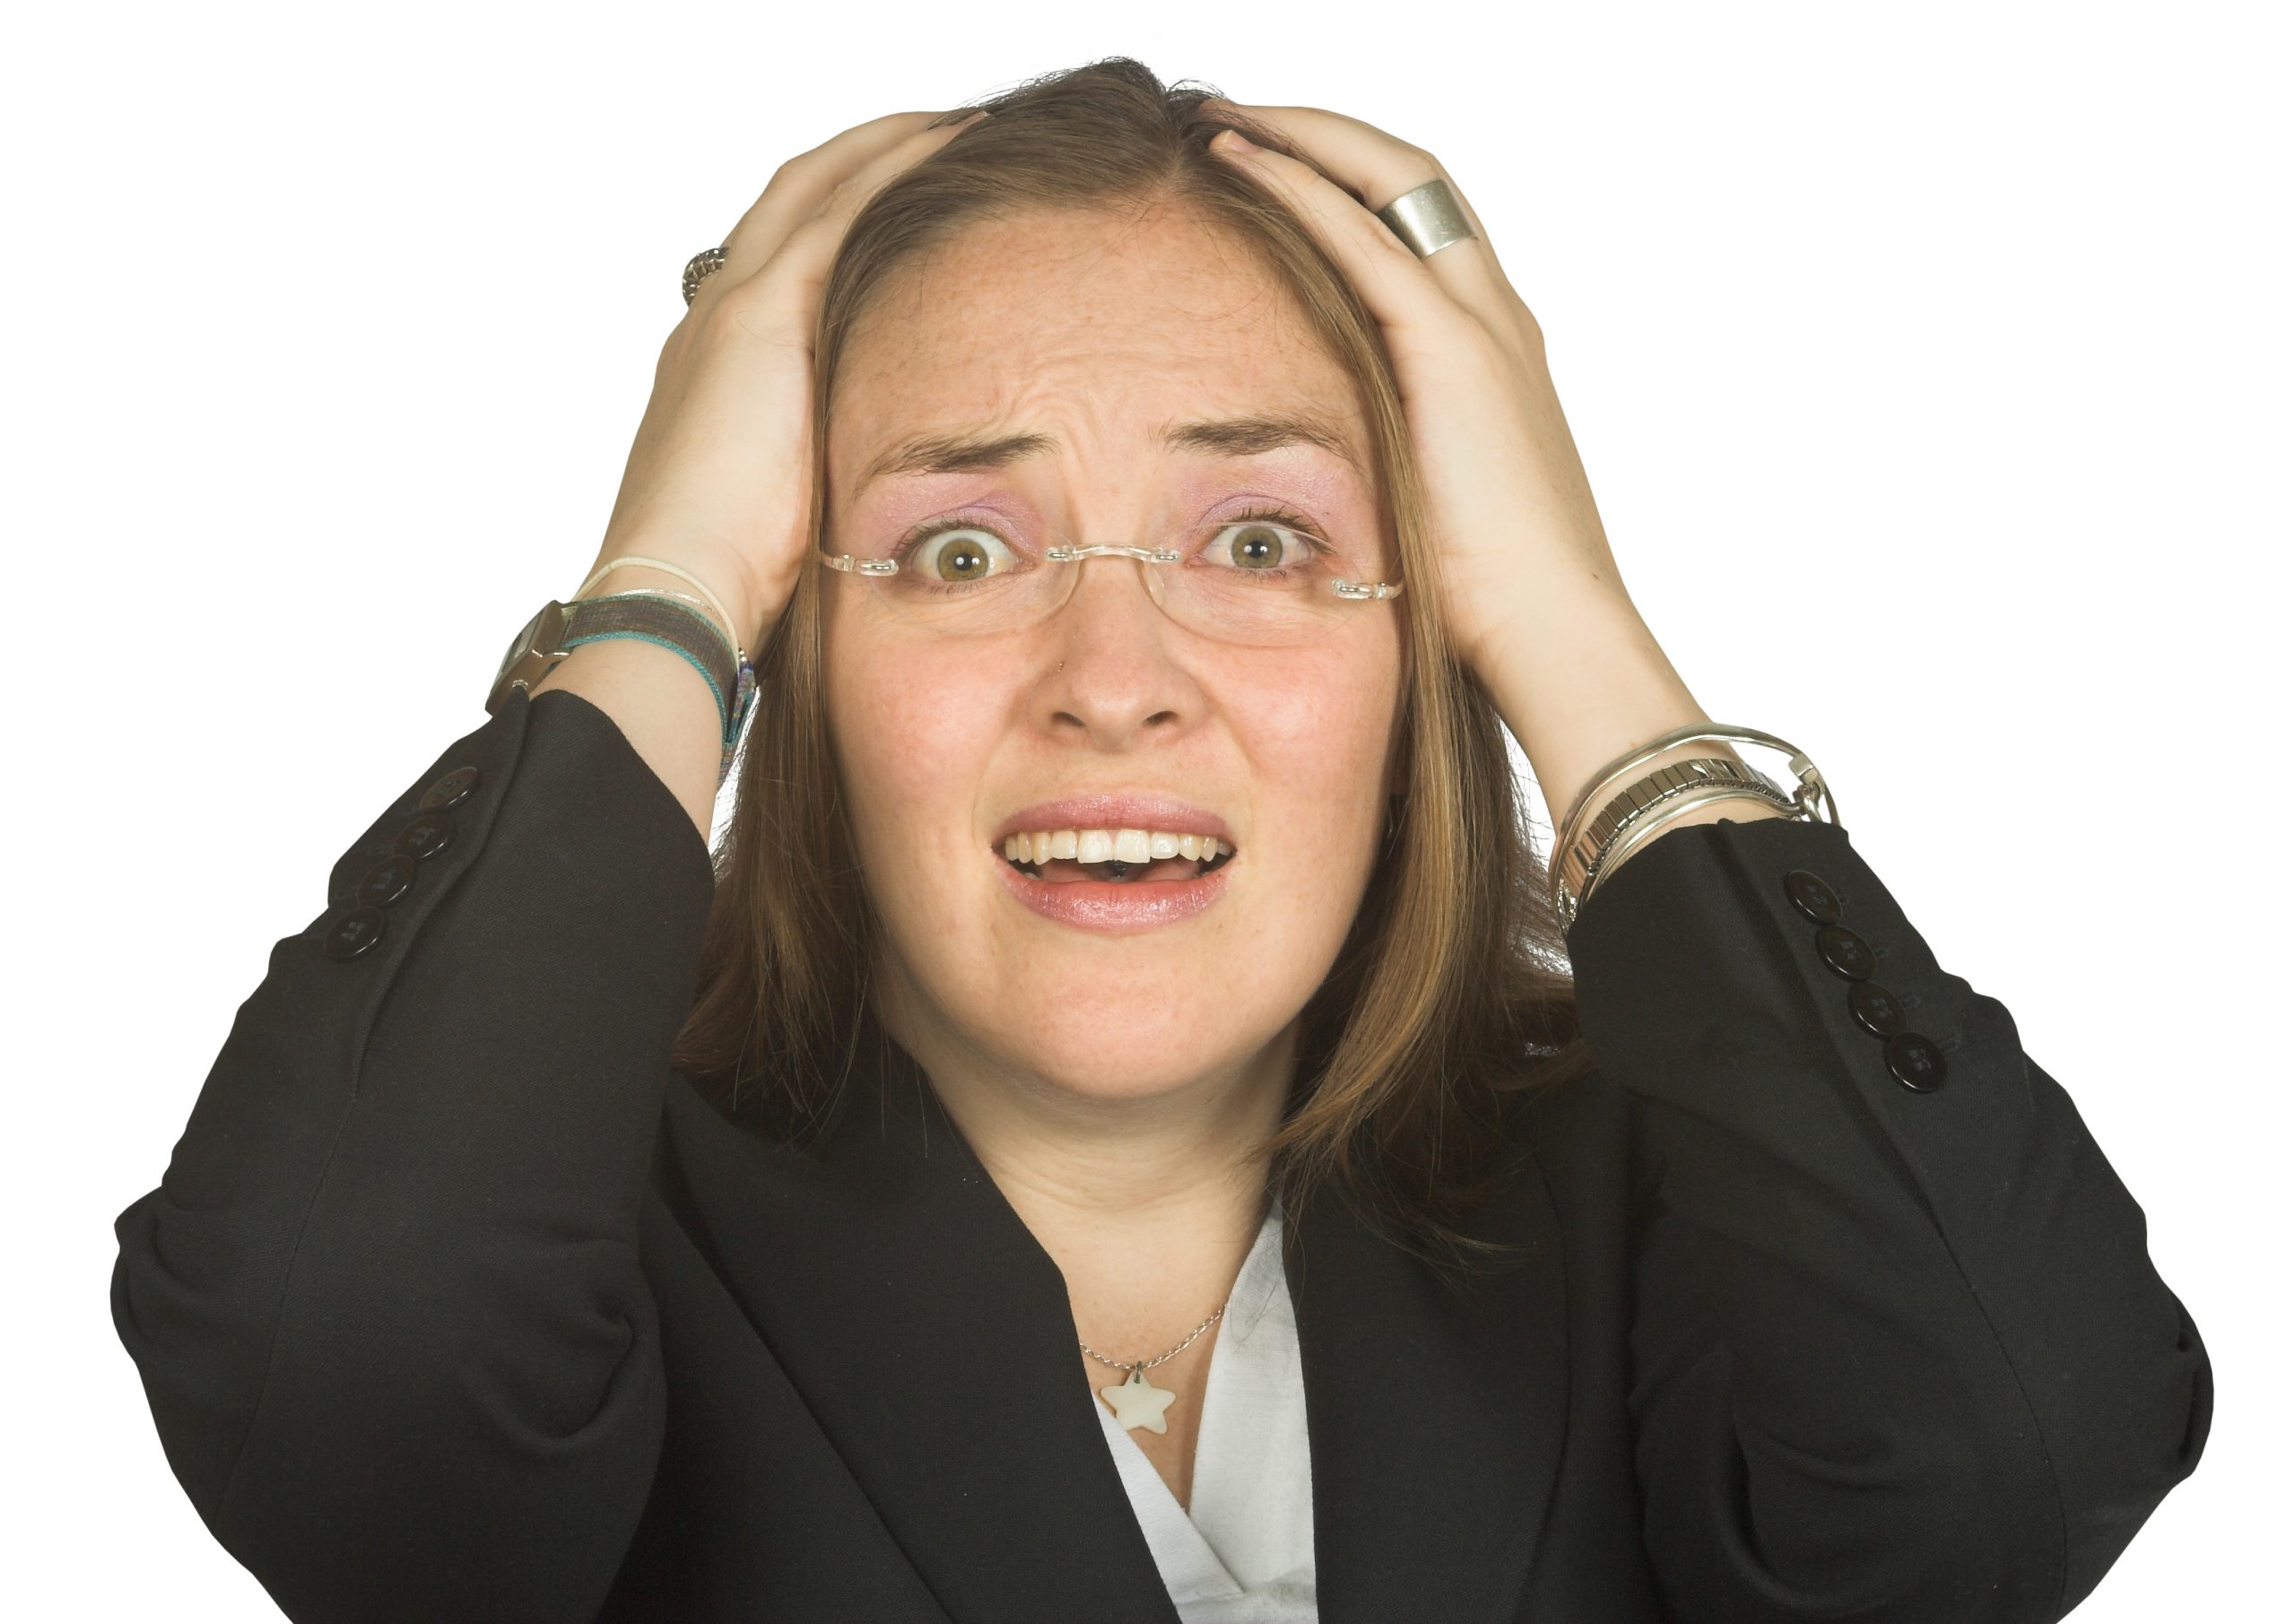 business woman making common adwords mistakes in shock